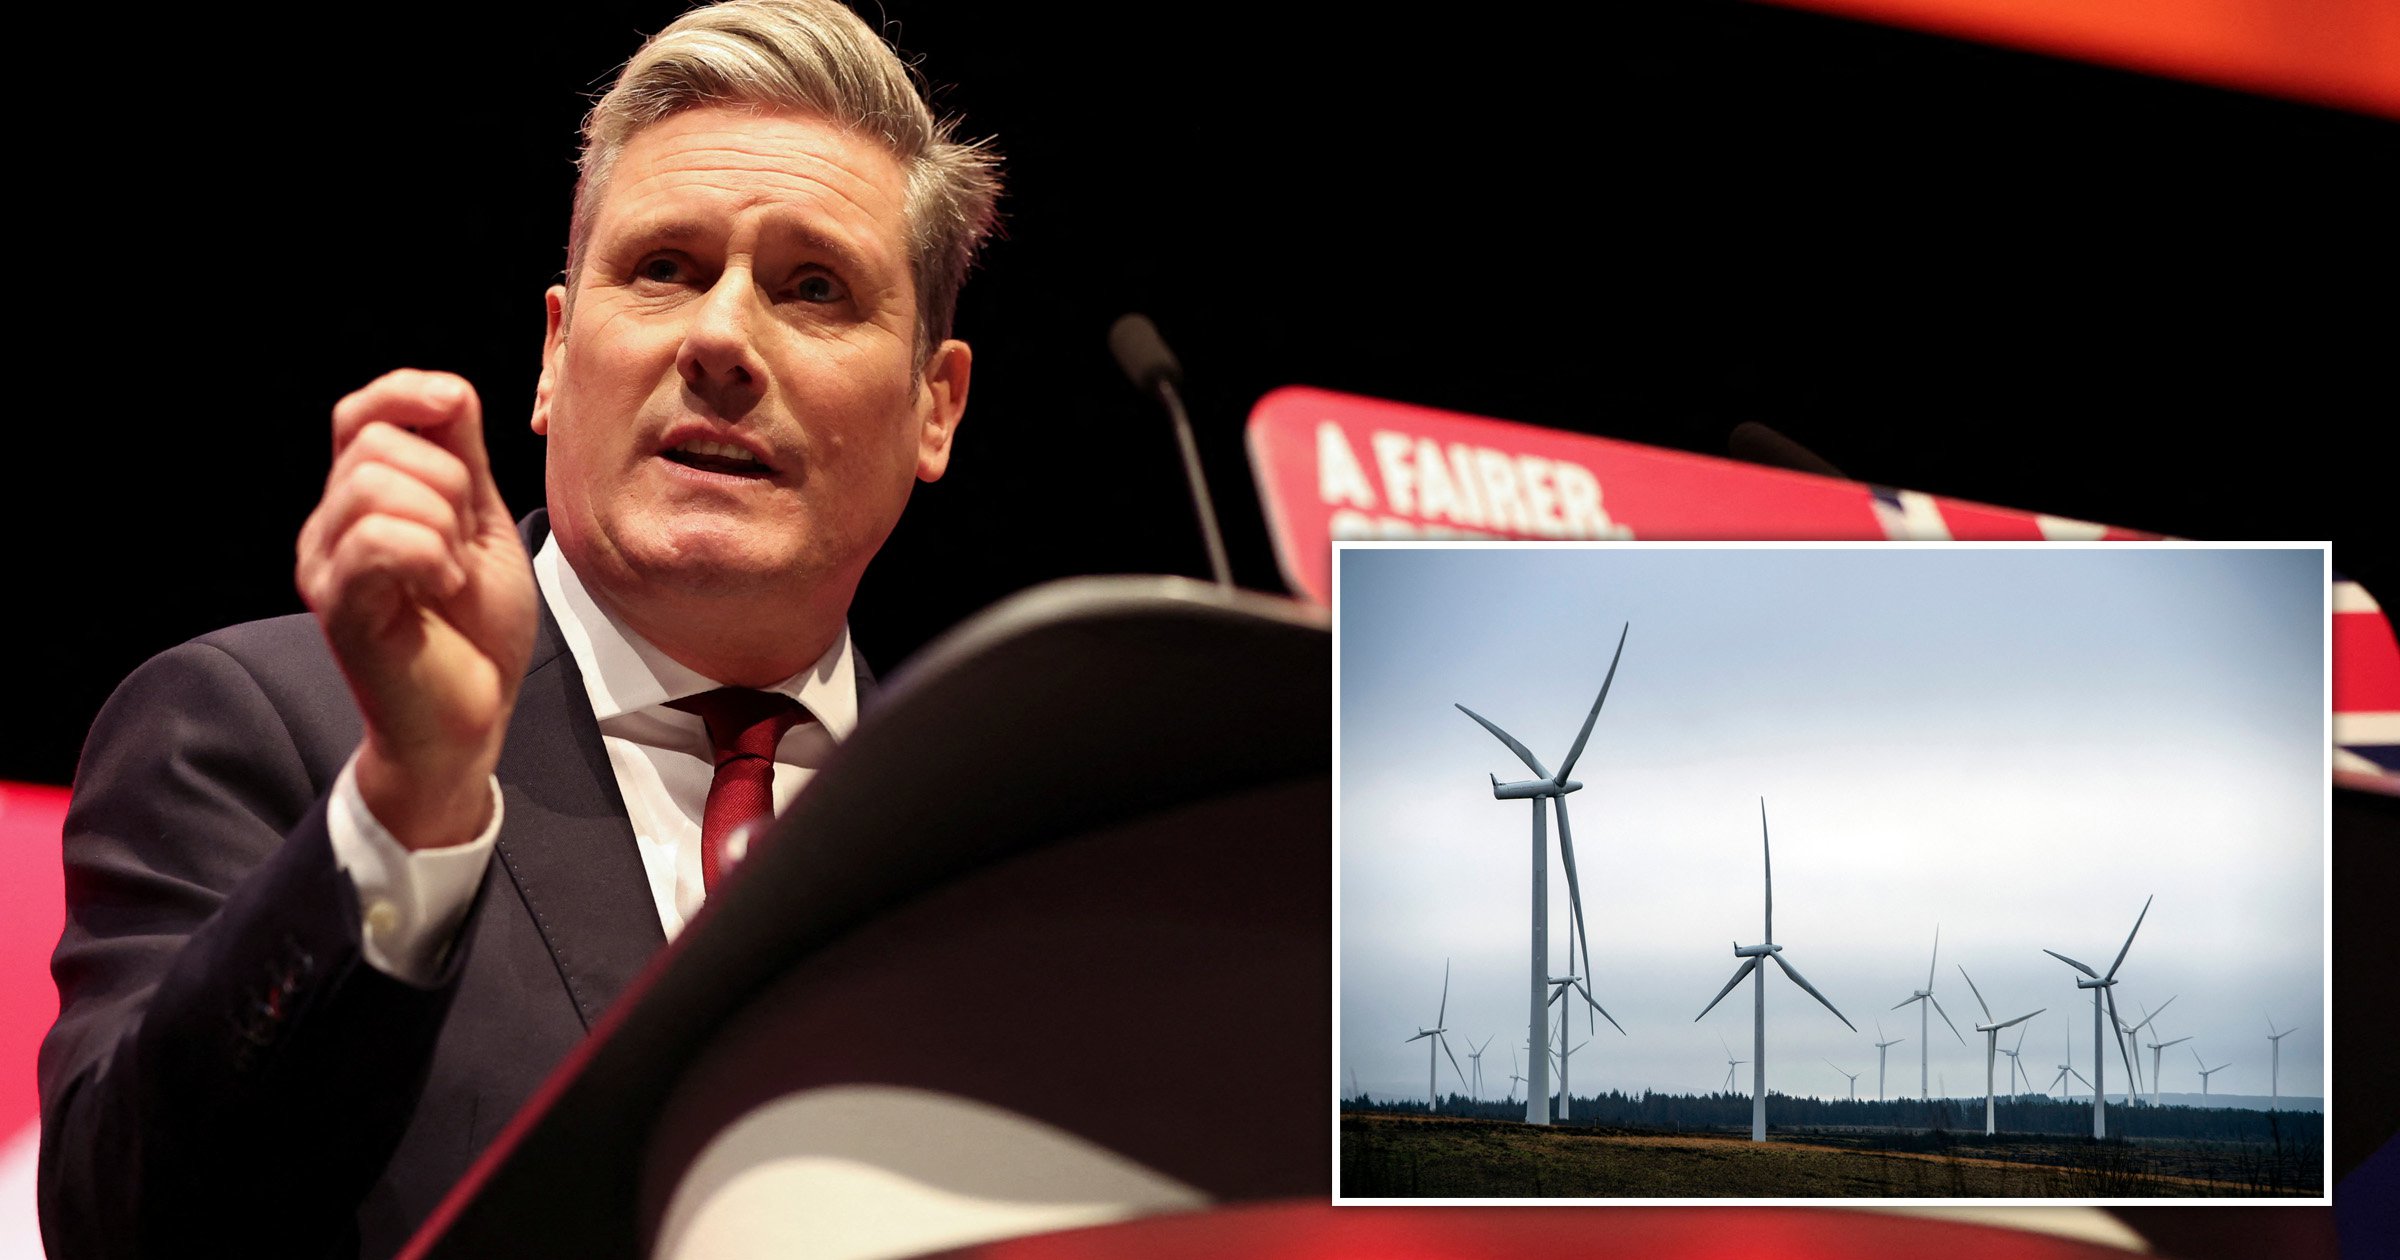 Keir to set up Great British Energy company within first year of government